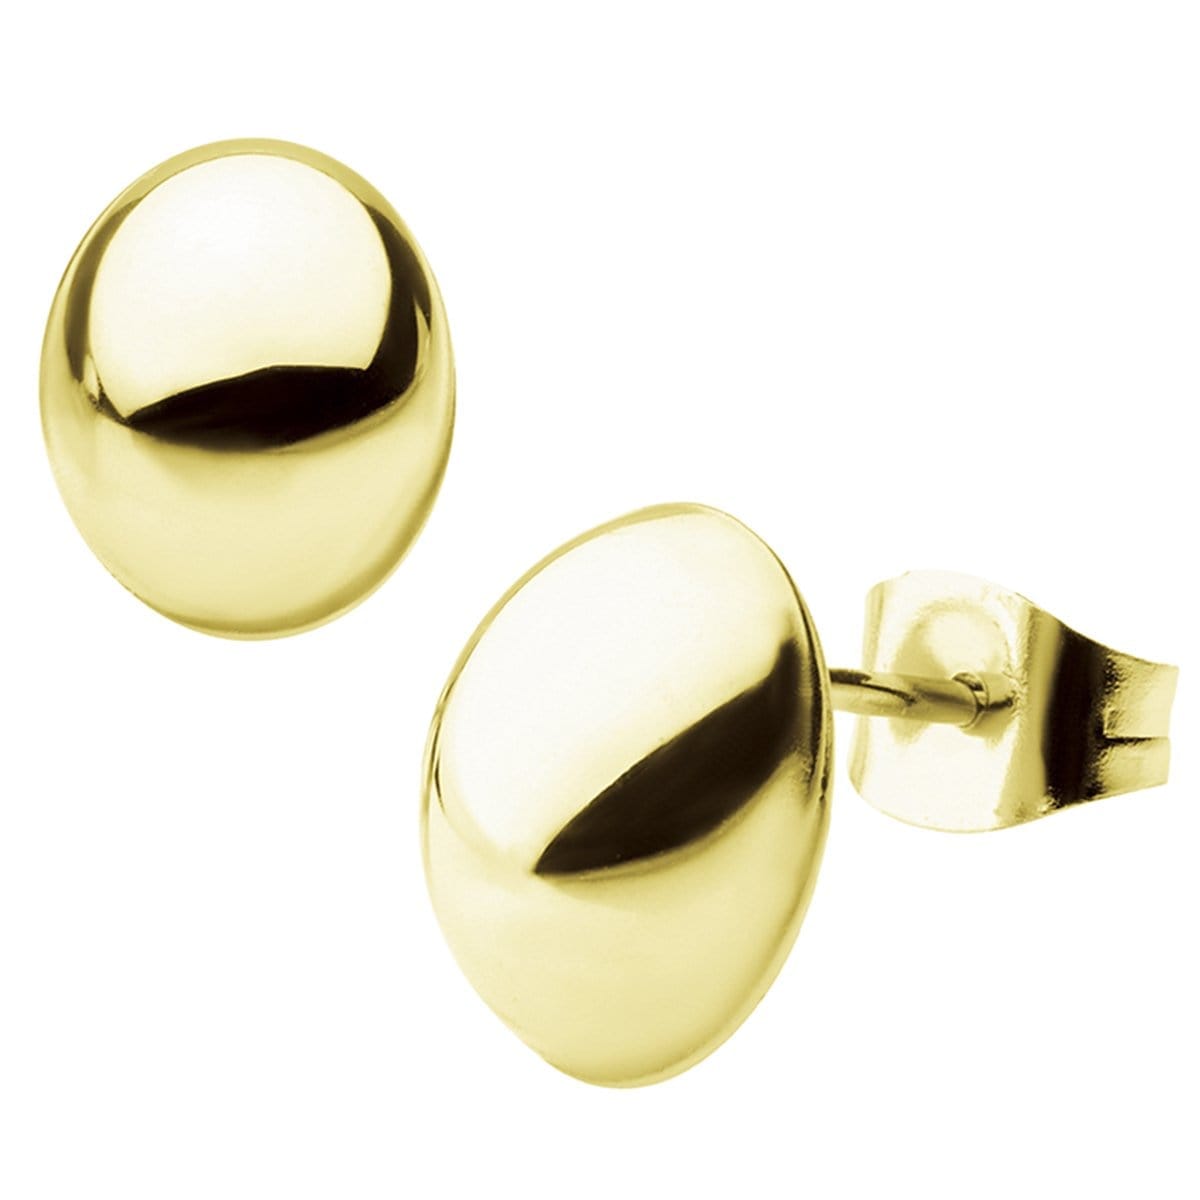 INOX JEWELRY Earrings Golden Tone Stainless Steel Small Oval Dome Studs SSE4808G